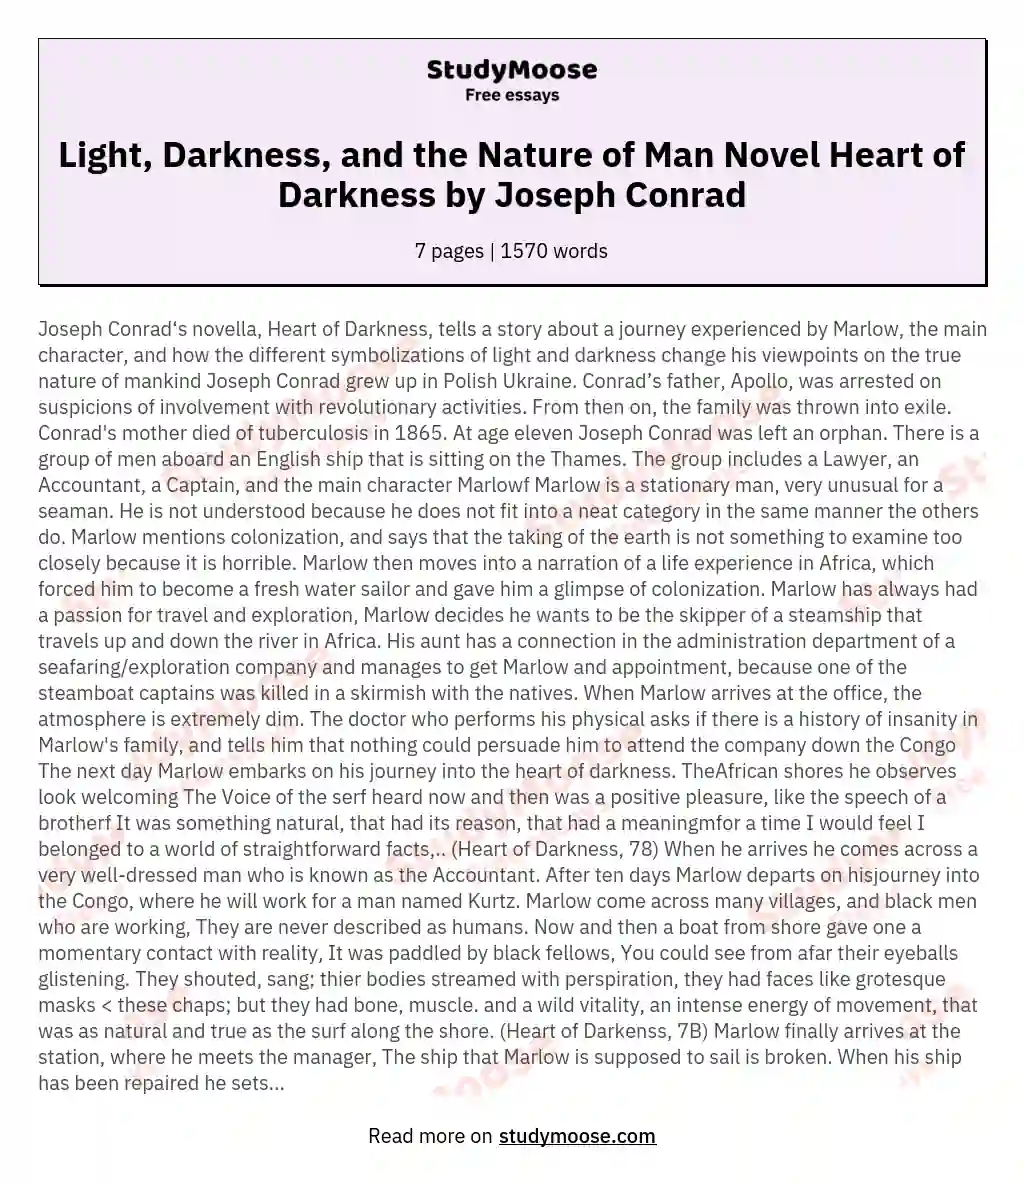 Light, Darkness, and the Nature of Man Novel Heart of Darkness by Joseph Conrad essay